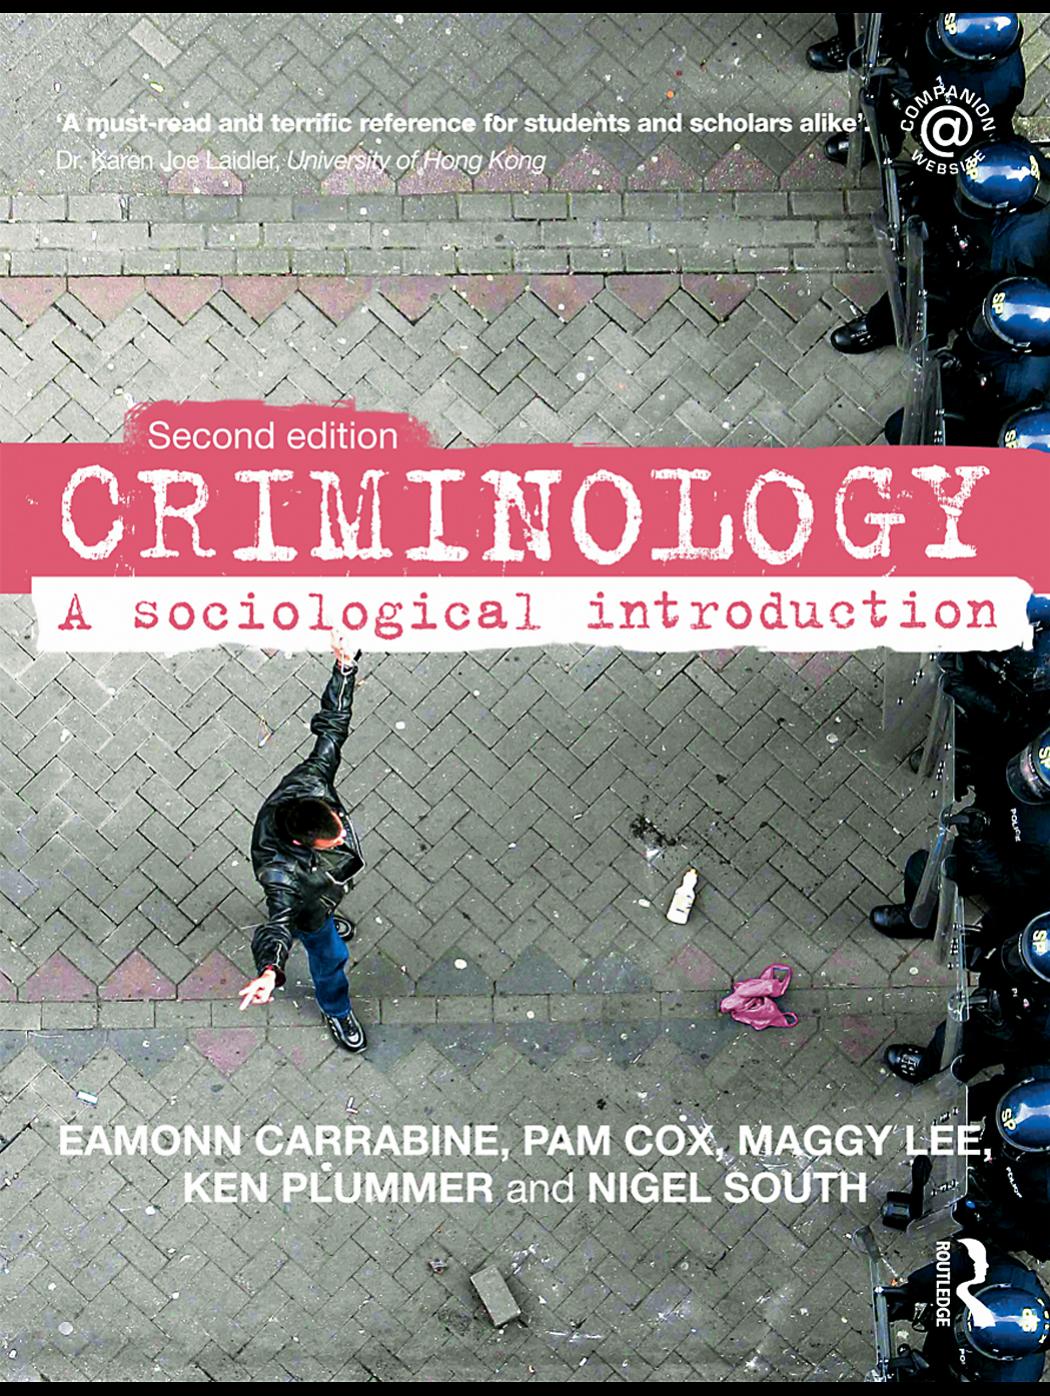 Criminology: A sociological introduction, Second edition